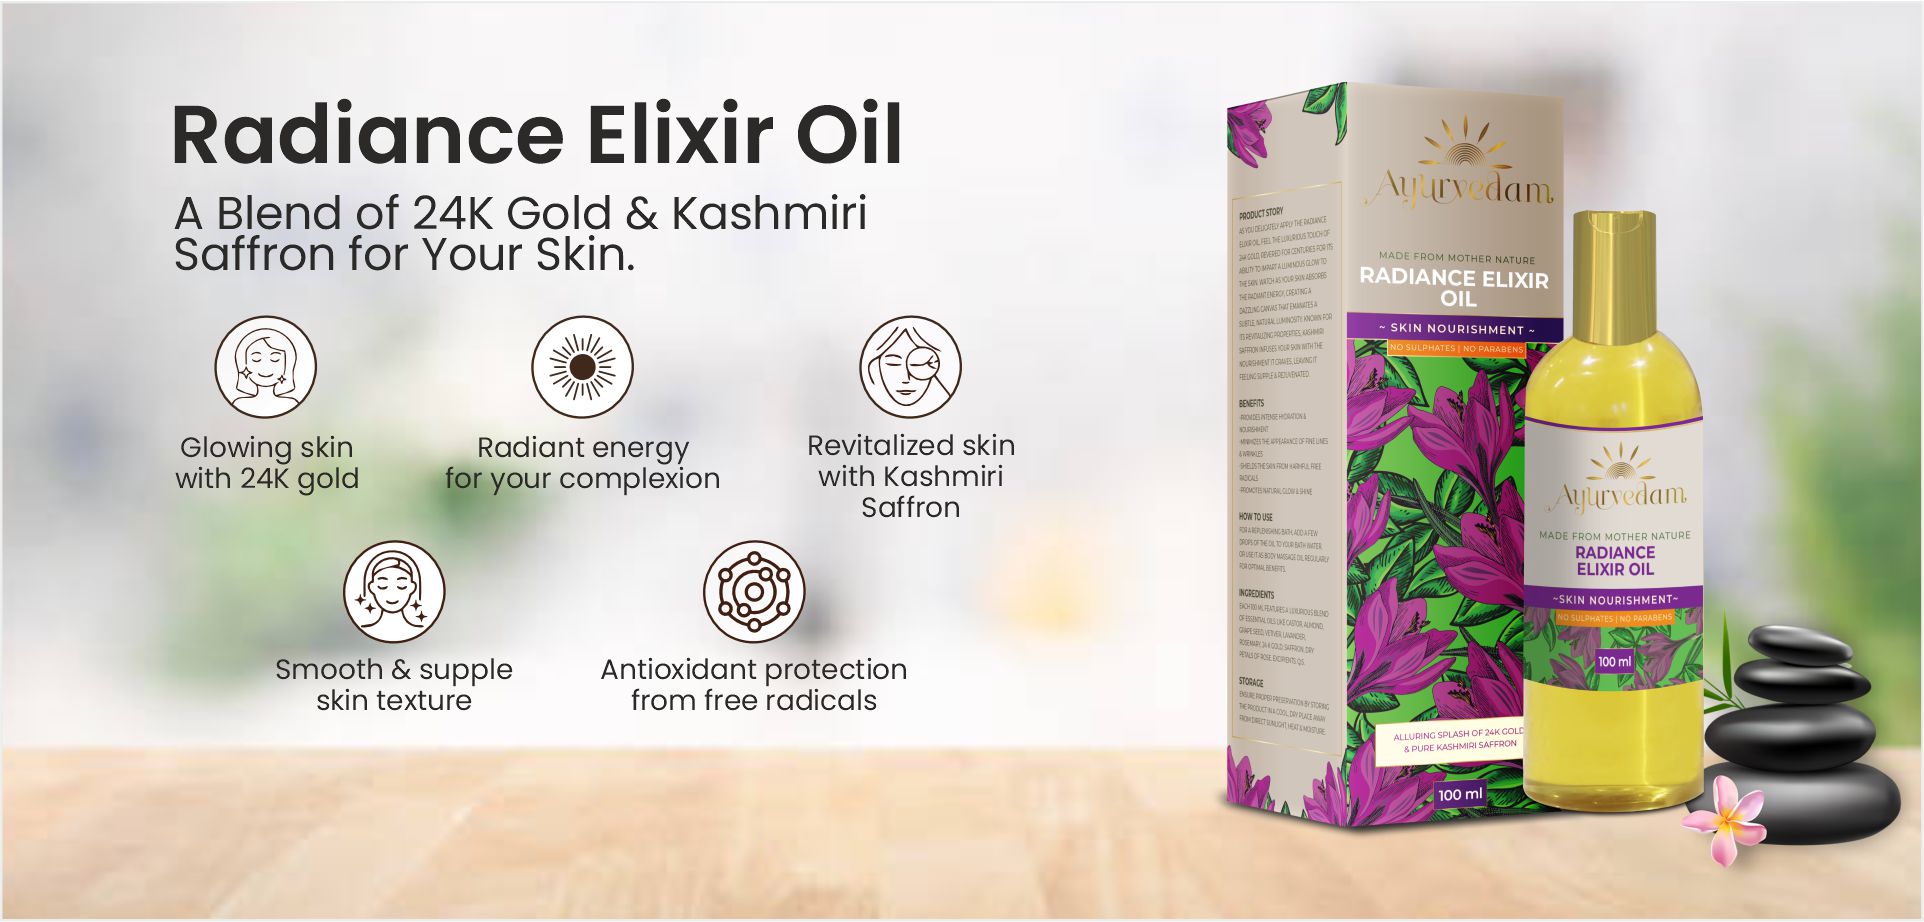 Ayurvedam Radiance Elixir Oil Banner with it's Benefits Listed.